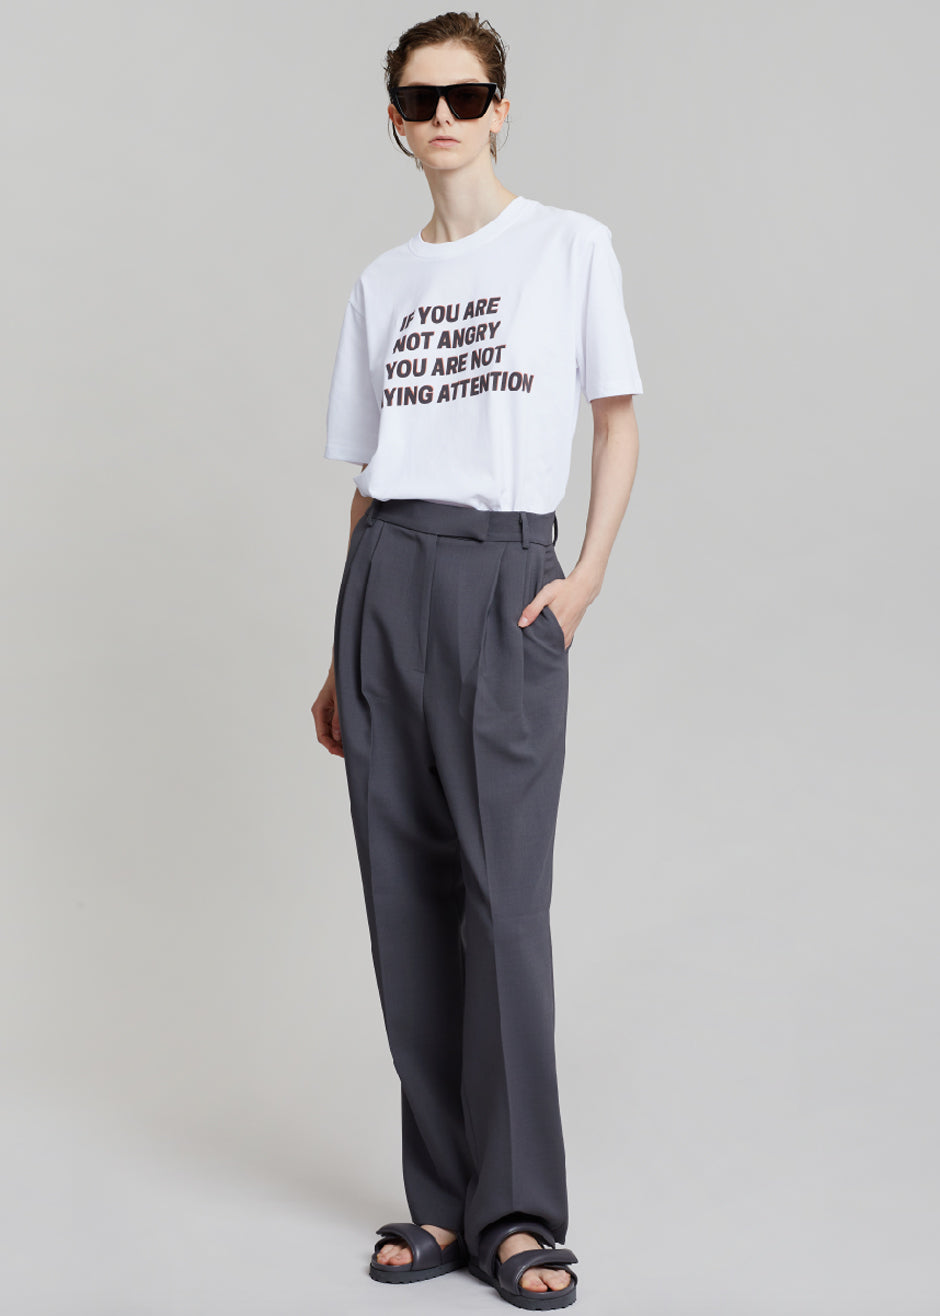 The Frankie Shop x Jeanne Friot If You T-Shirt - White/Black - 11